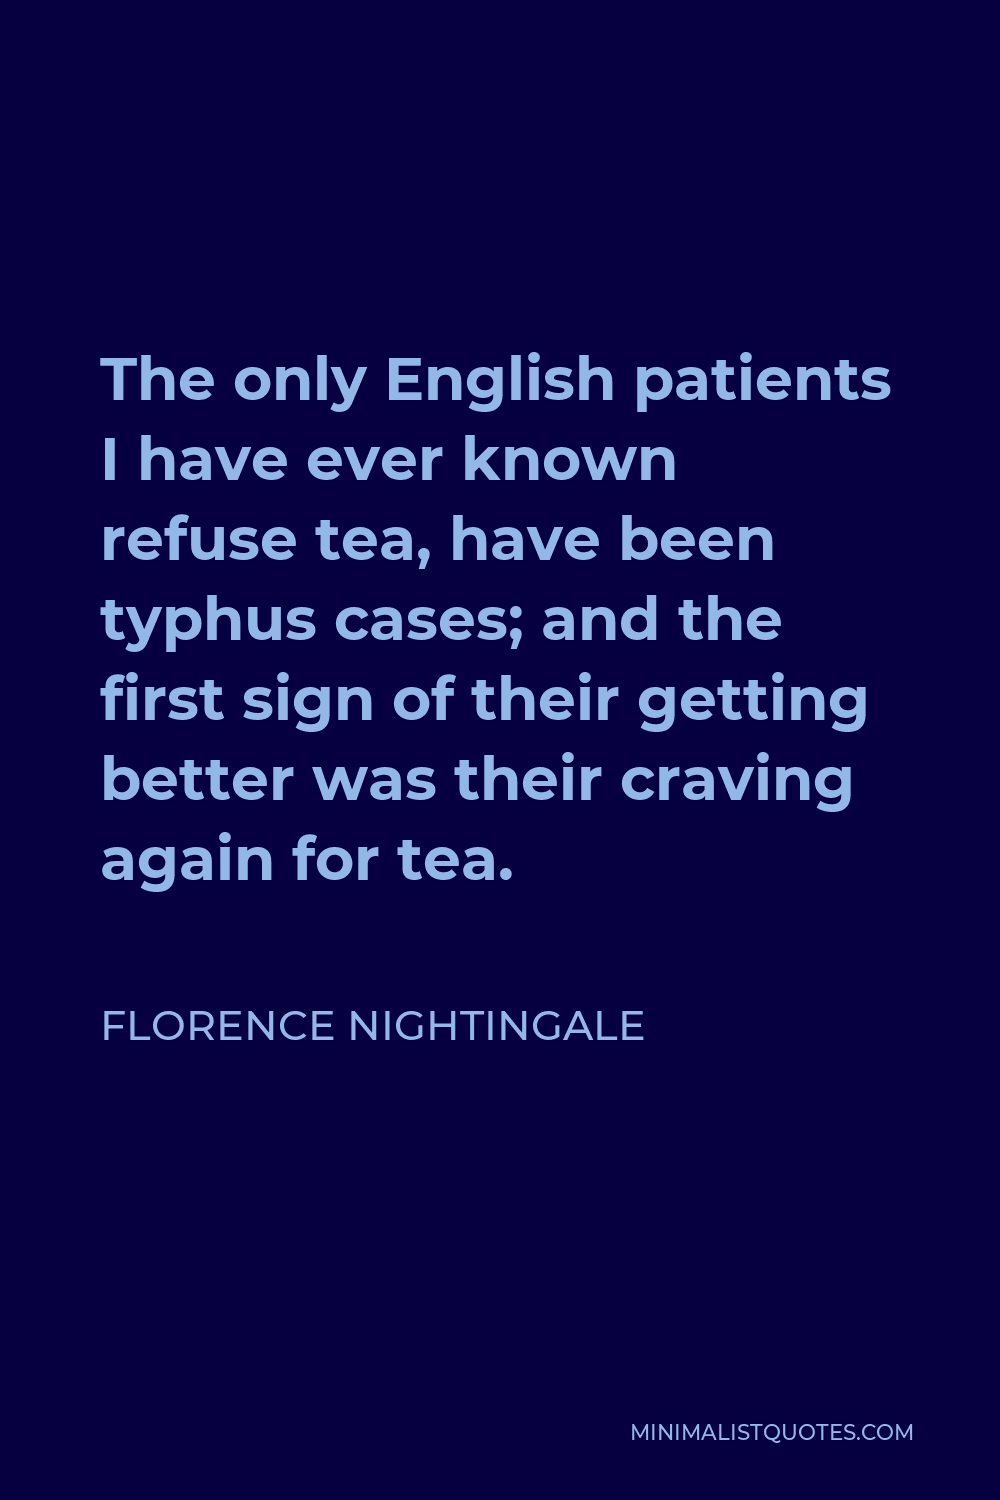 Florence Nightingale Quote - The only English patients I have ever known refuse tea, have been typhus cases; and the first sign of their getting better was their craving again for tea.